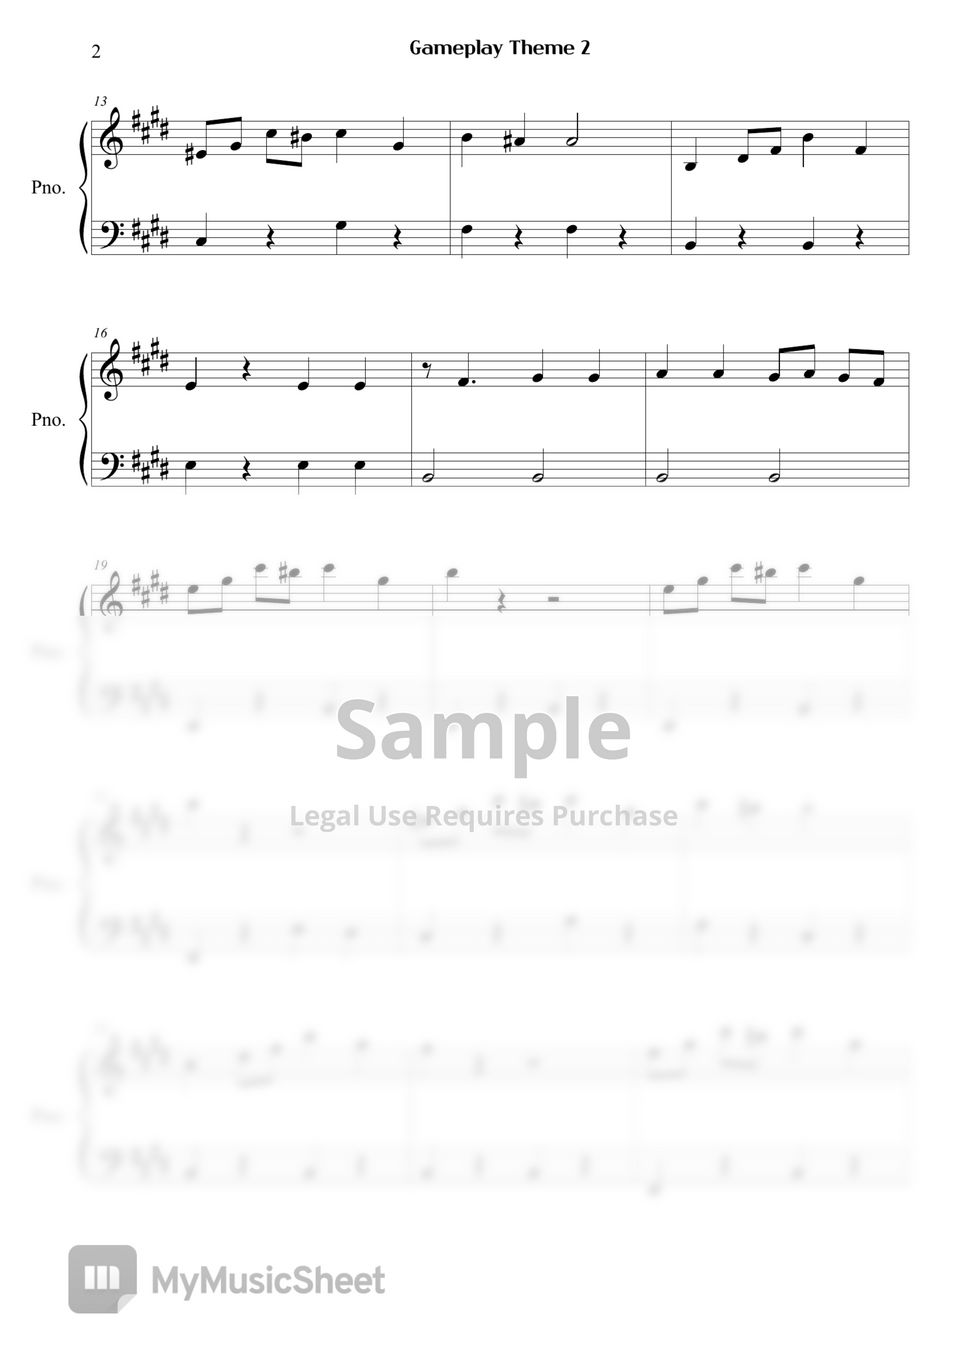 Royal Match - Gameplay Theme 2 Sheets by Right Now Piano